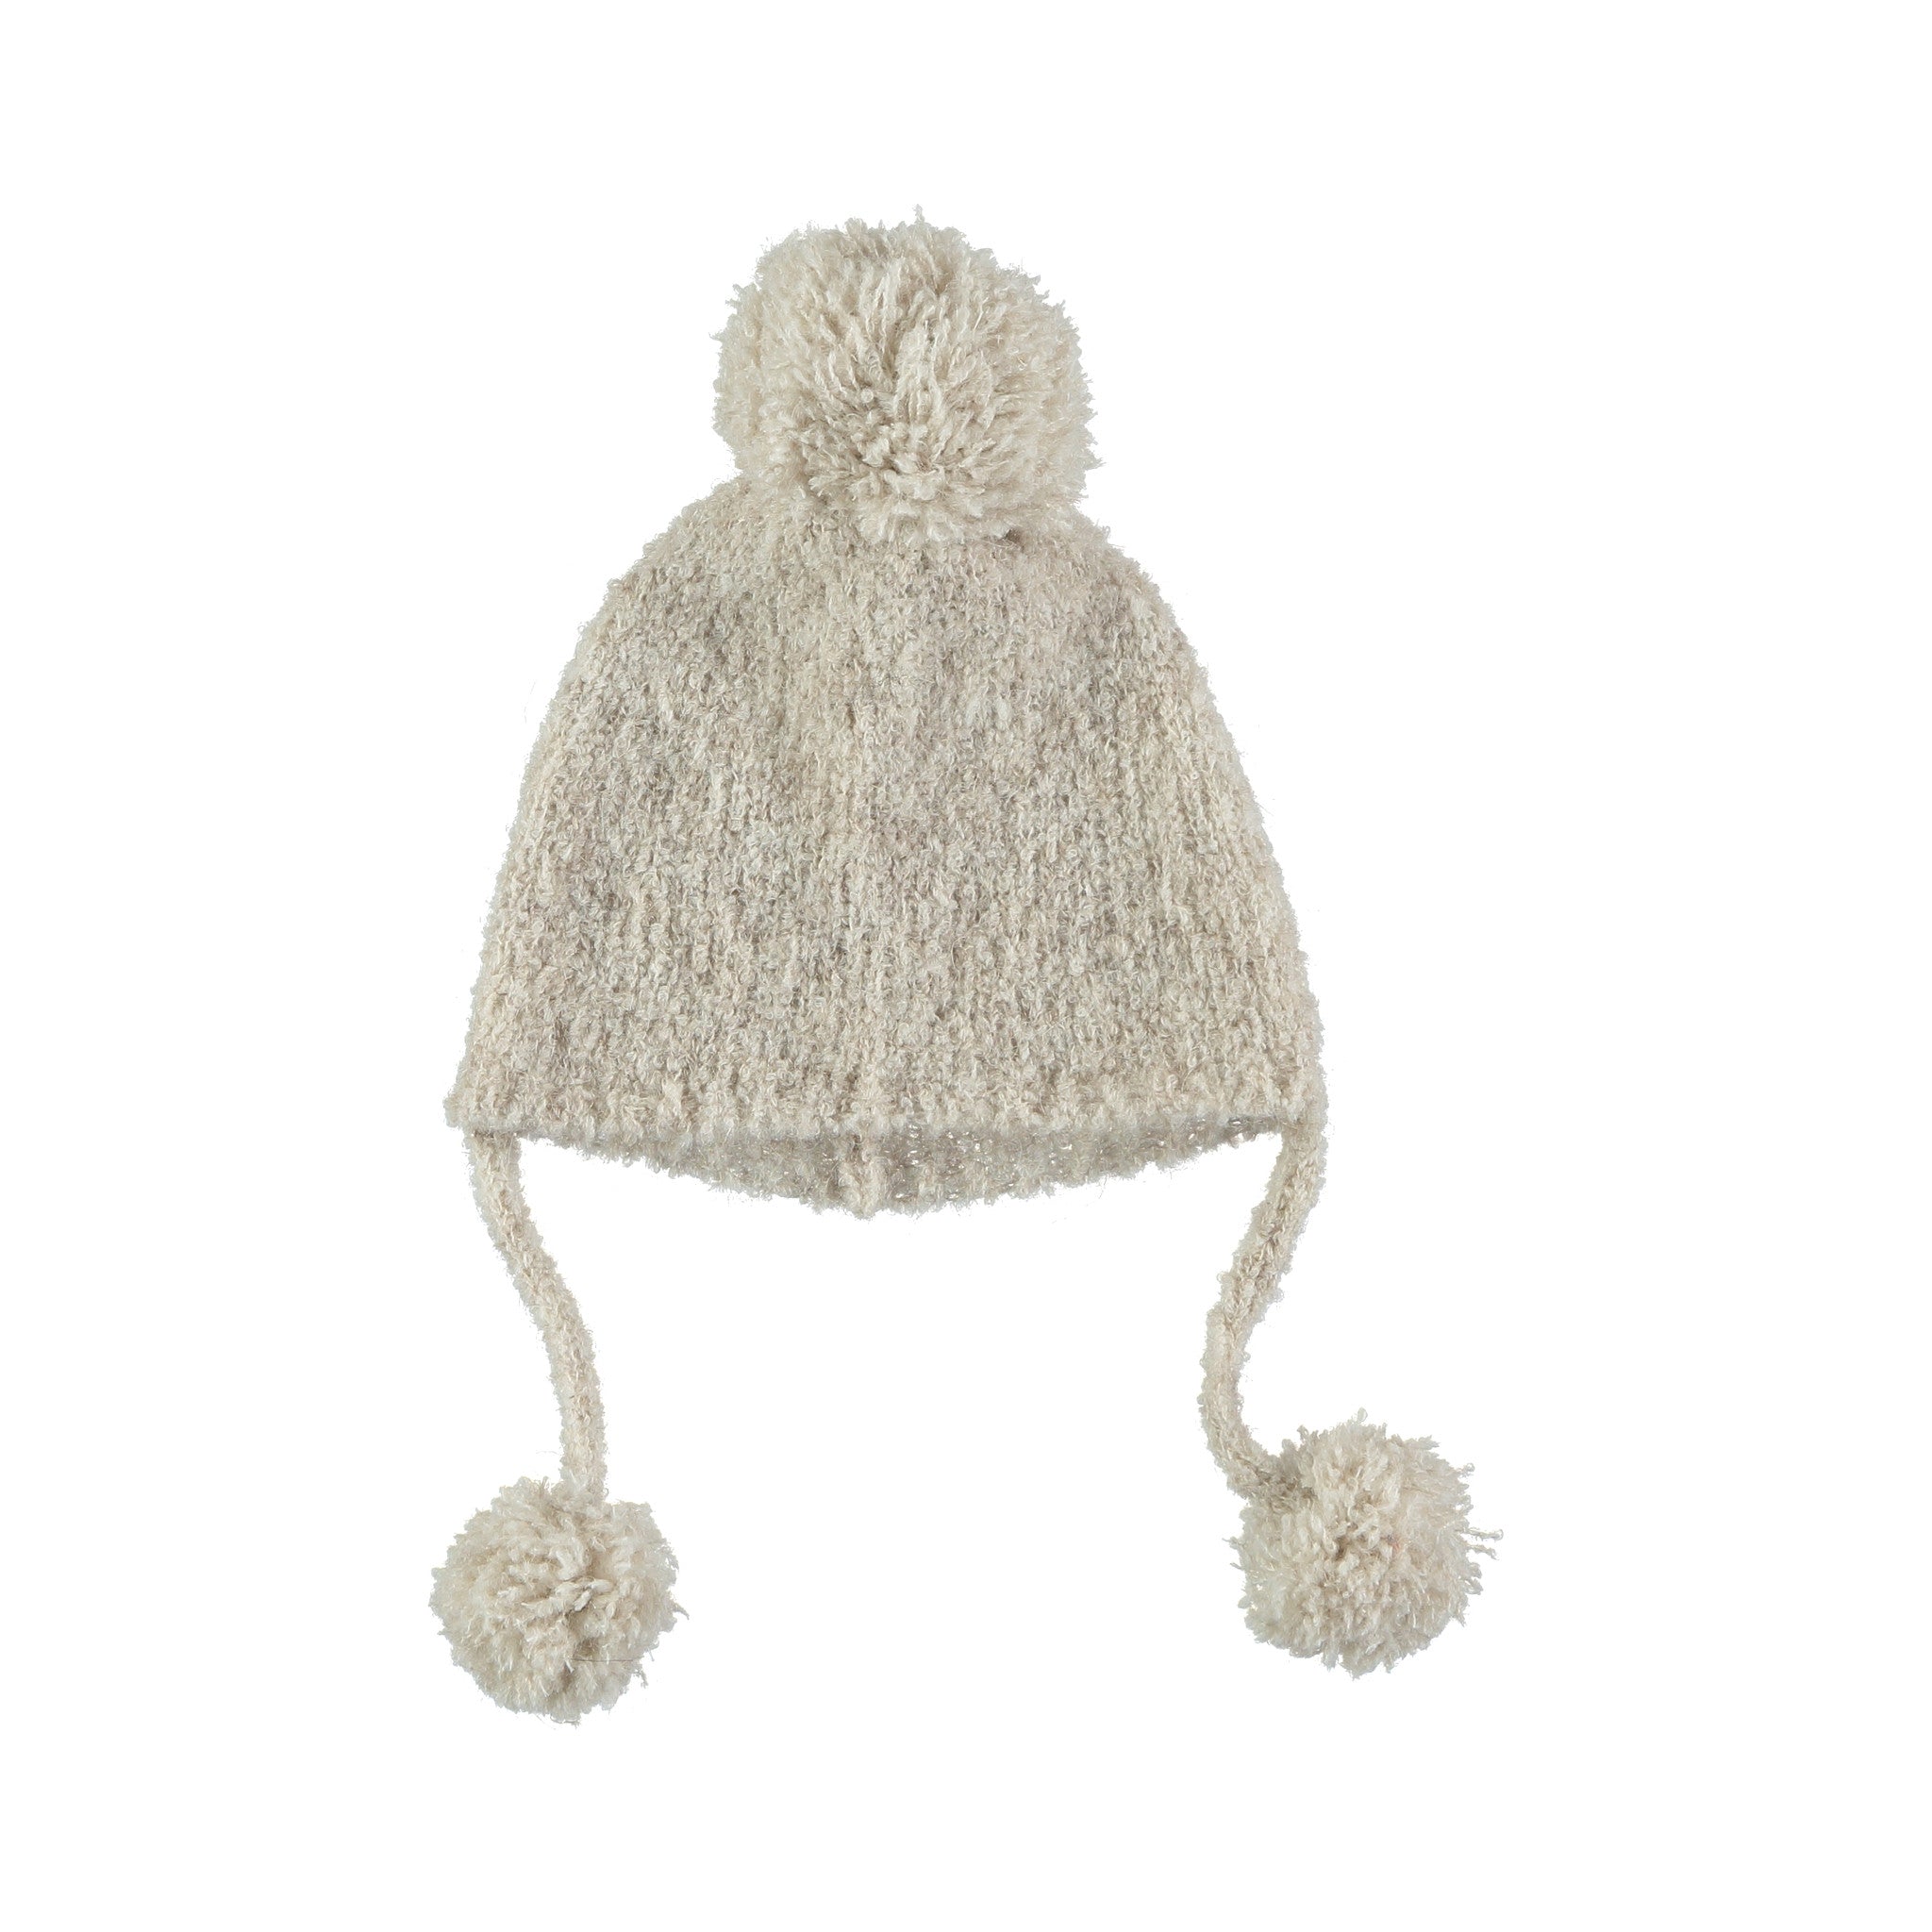 Baby Hat by Buho Barcelona at Bonjour Baby Baskets